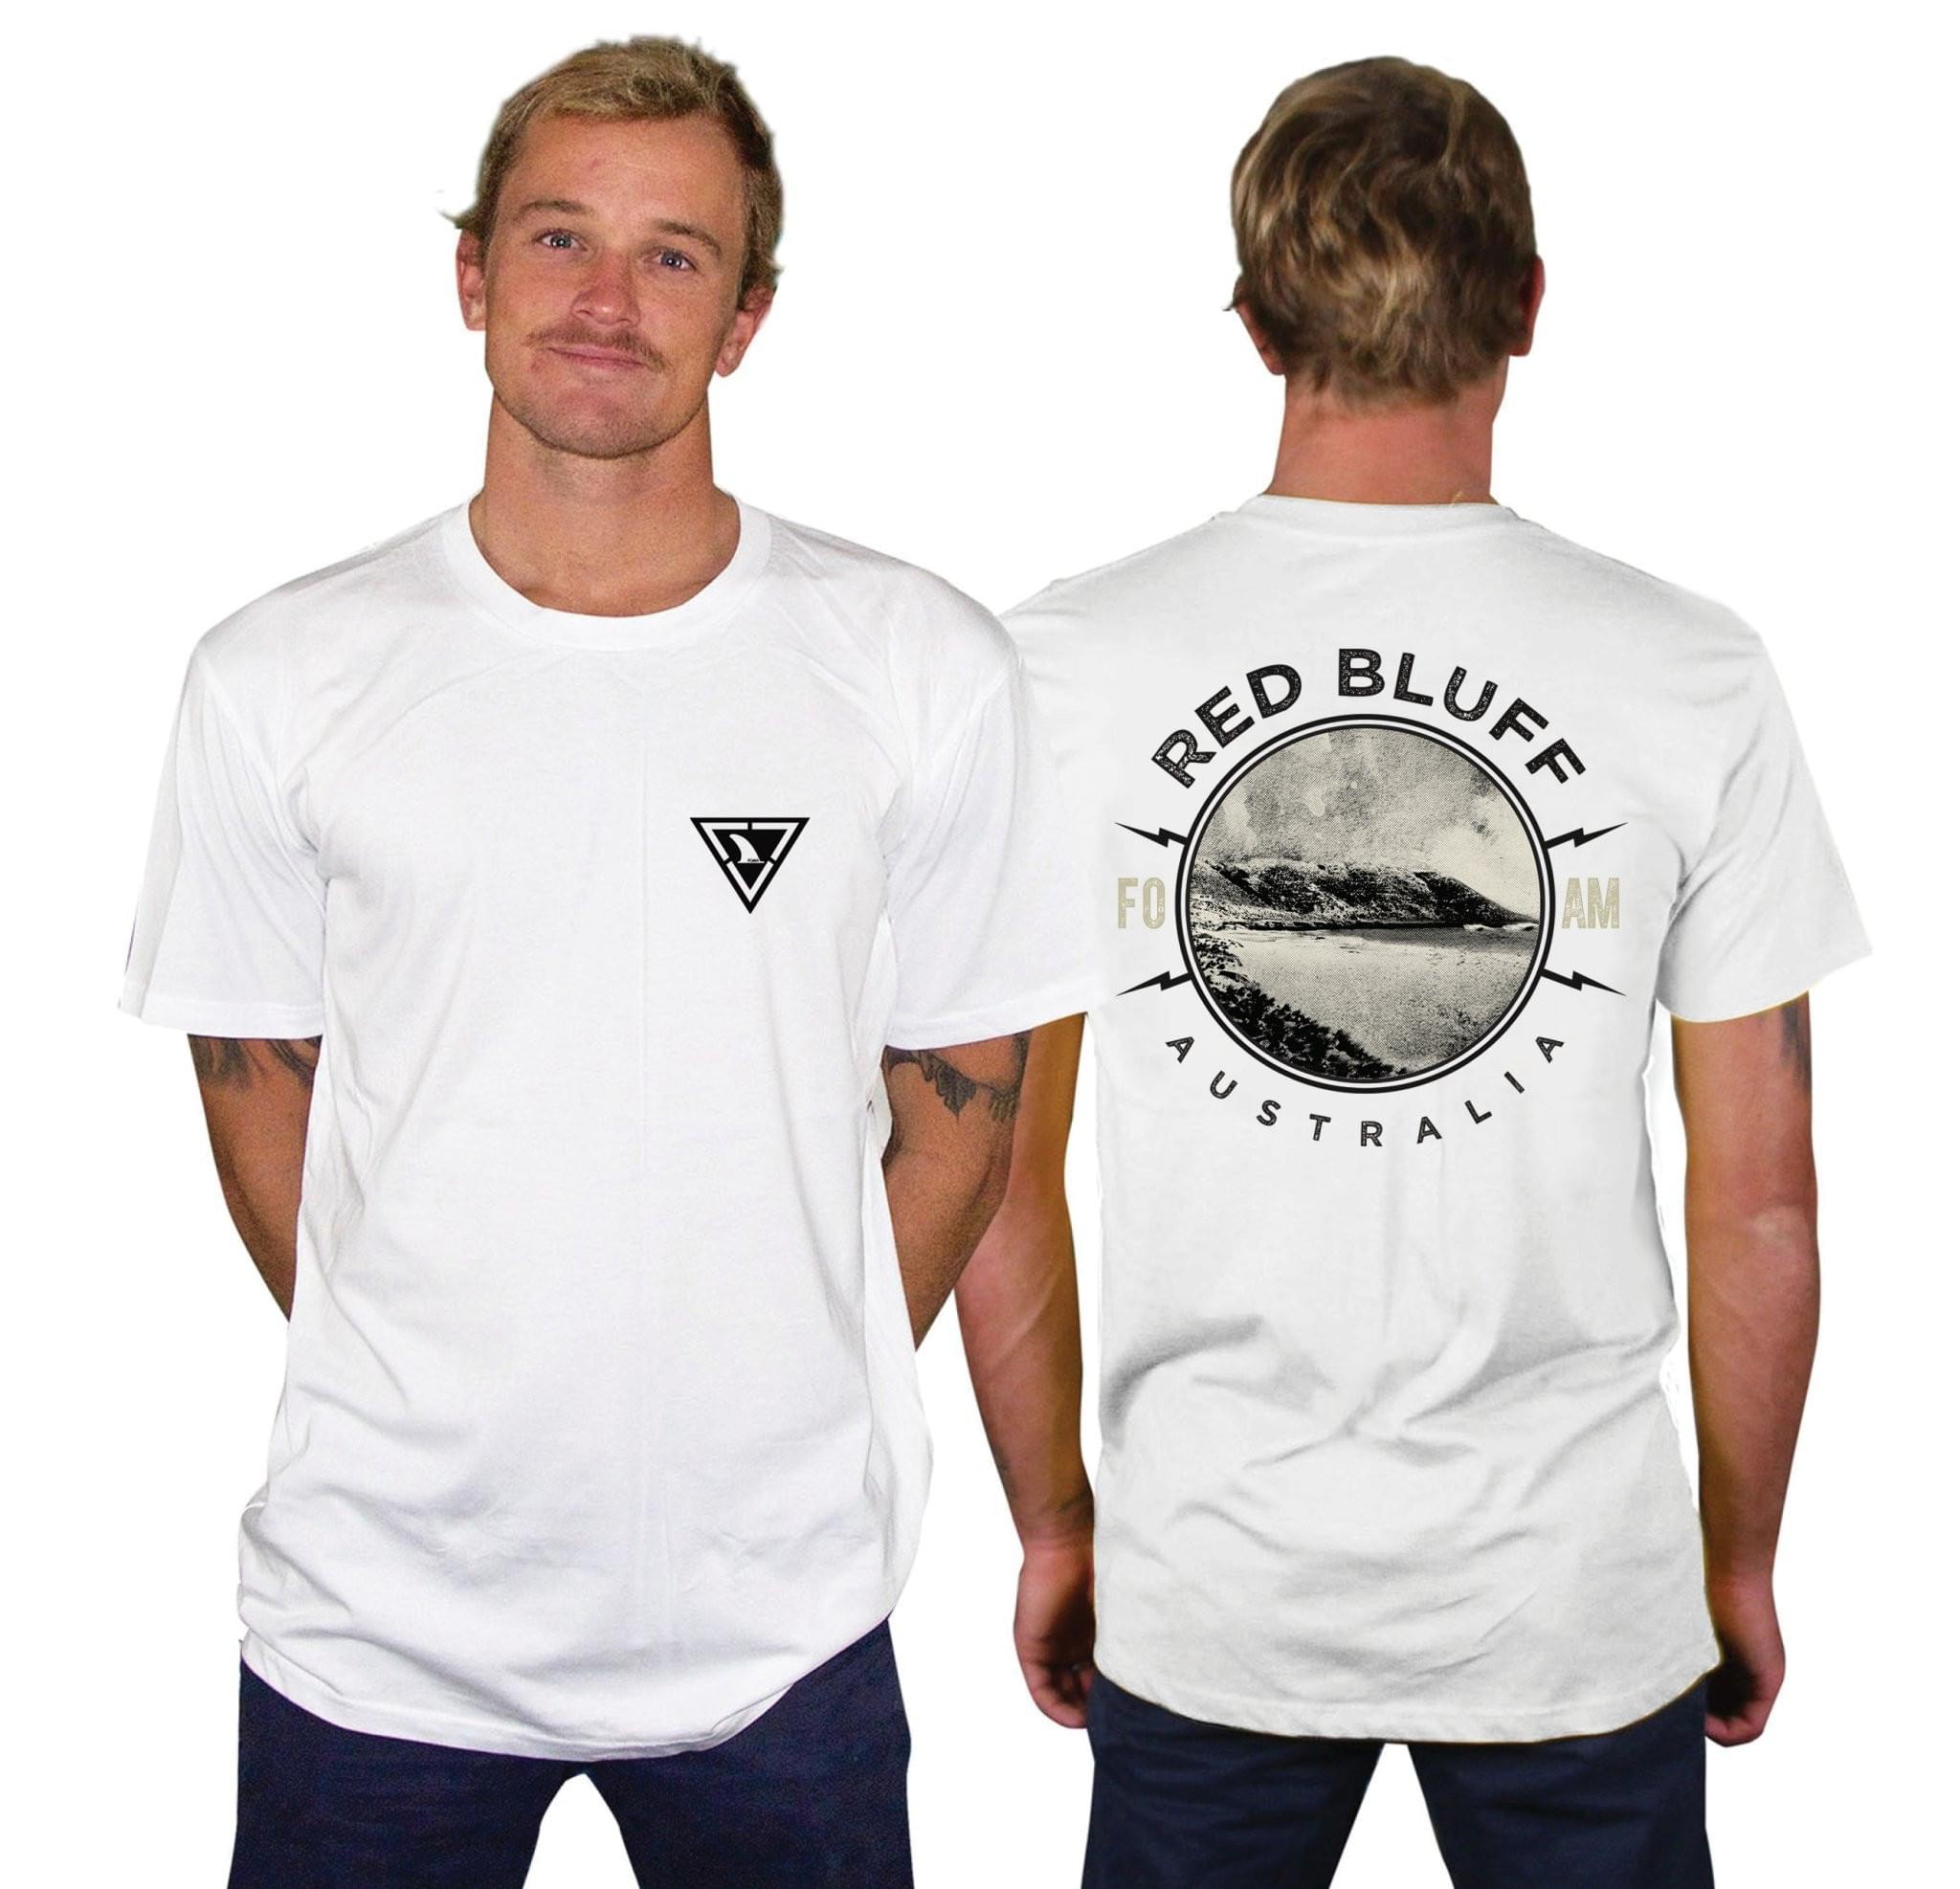 Red Bluff Tee